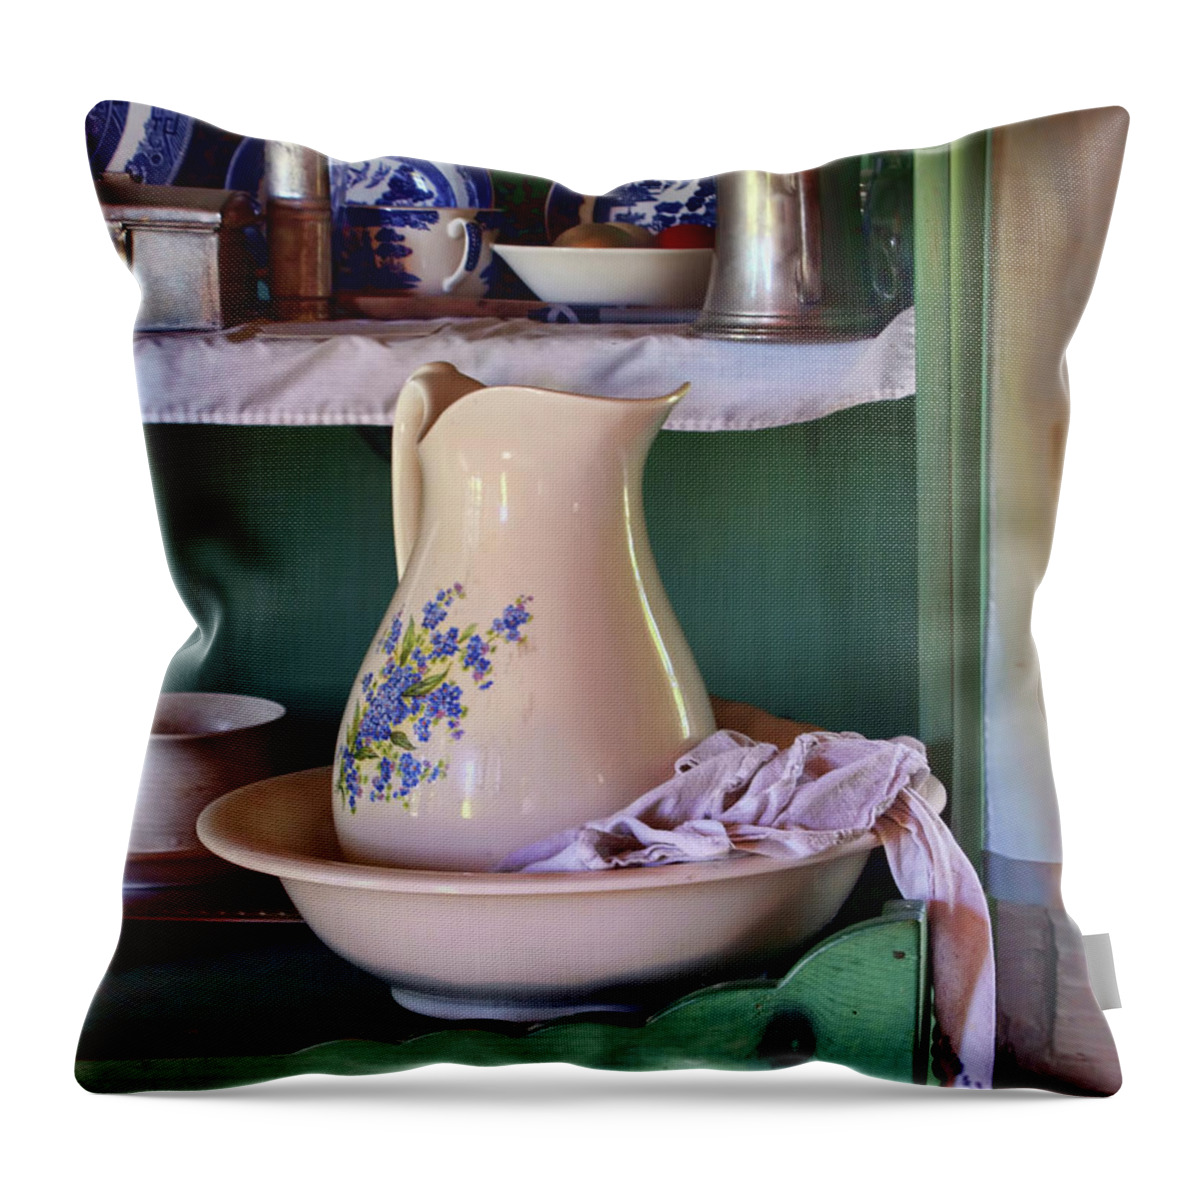 Vintage Throw Pillow featuring the photograph Wash Basin Still Life by Nikolyn McDonald